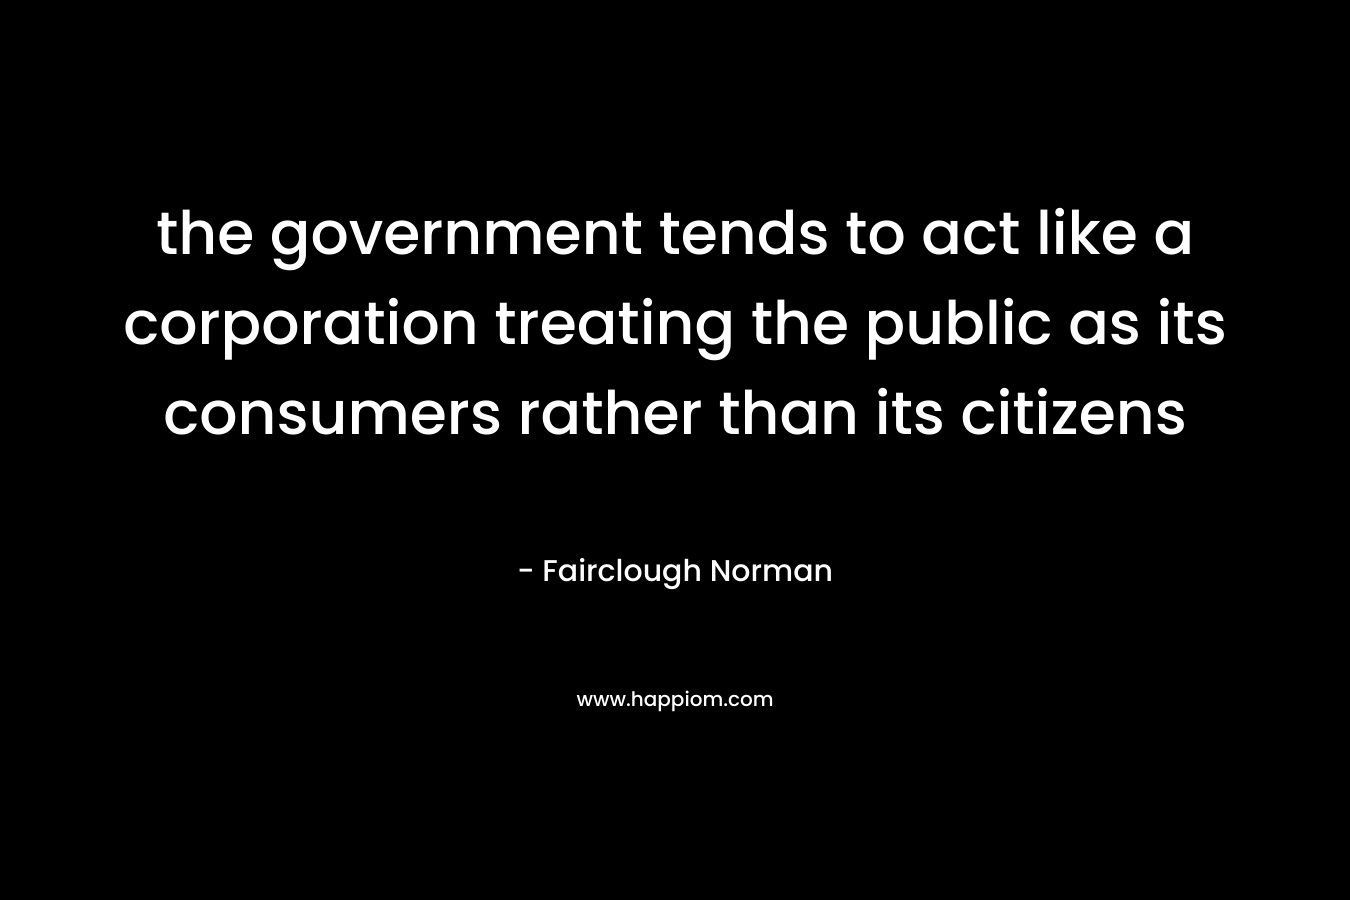 the government tends to act like a corporation treating the public as its consumers rather than its citizens